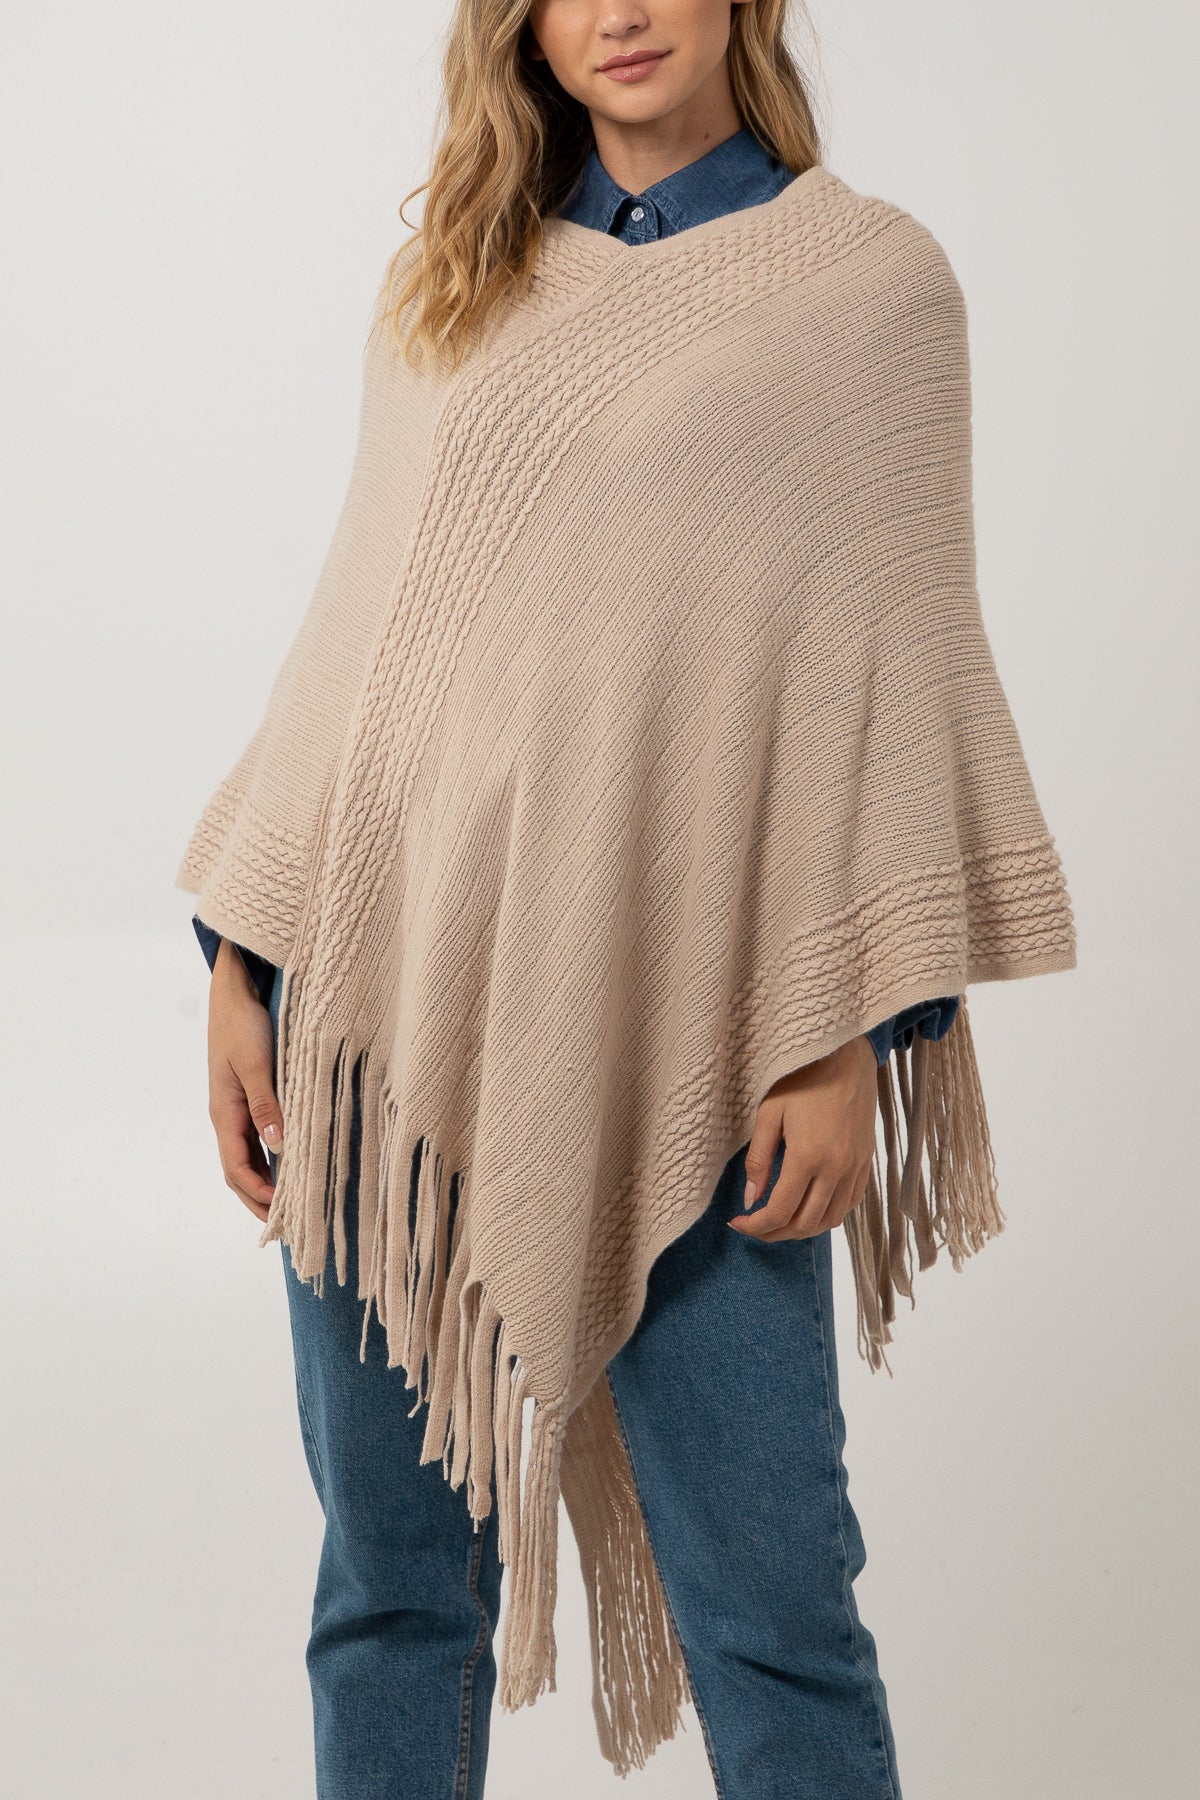 Crossover Fringed Poncho